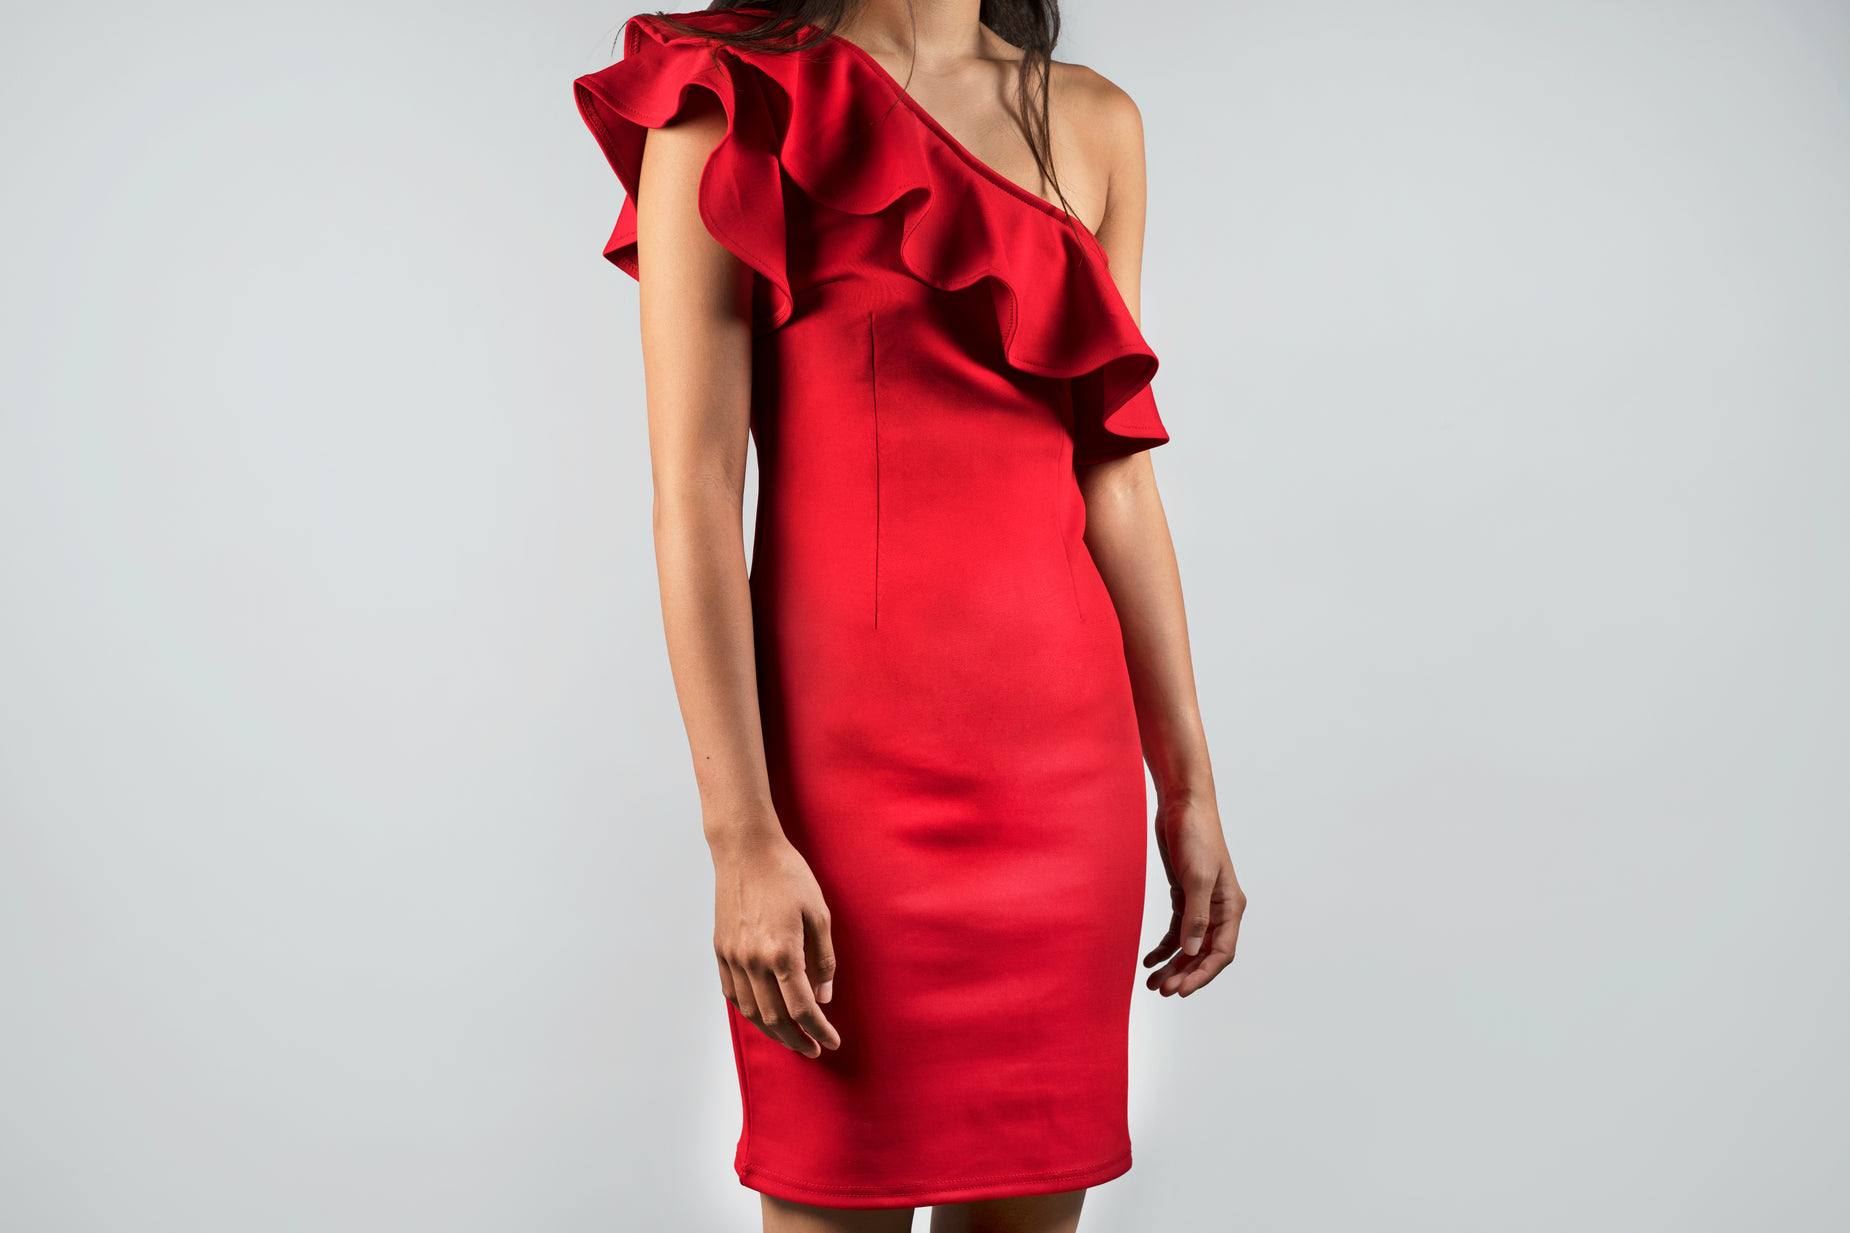 a model in a red dress with a ruffle over the shoulder